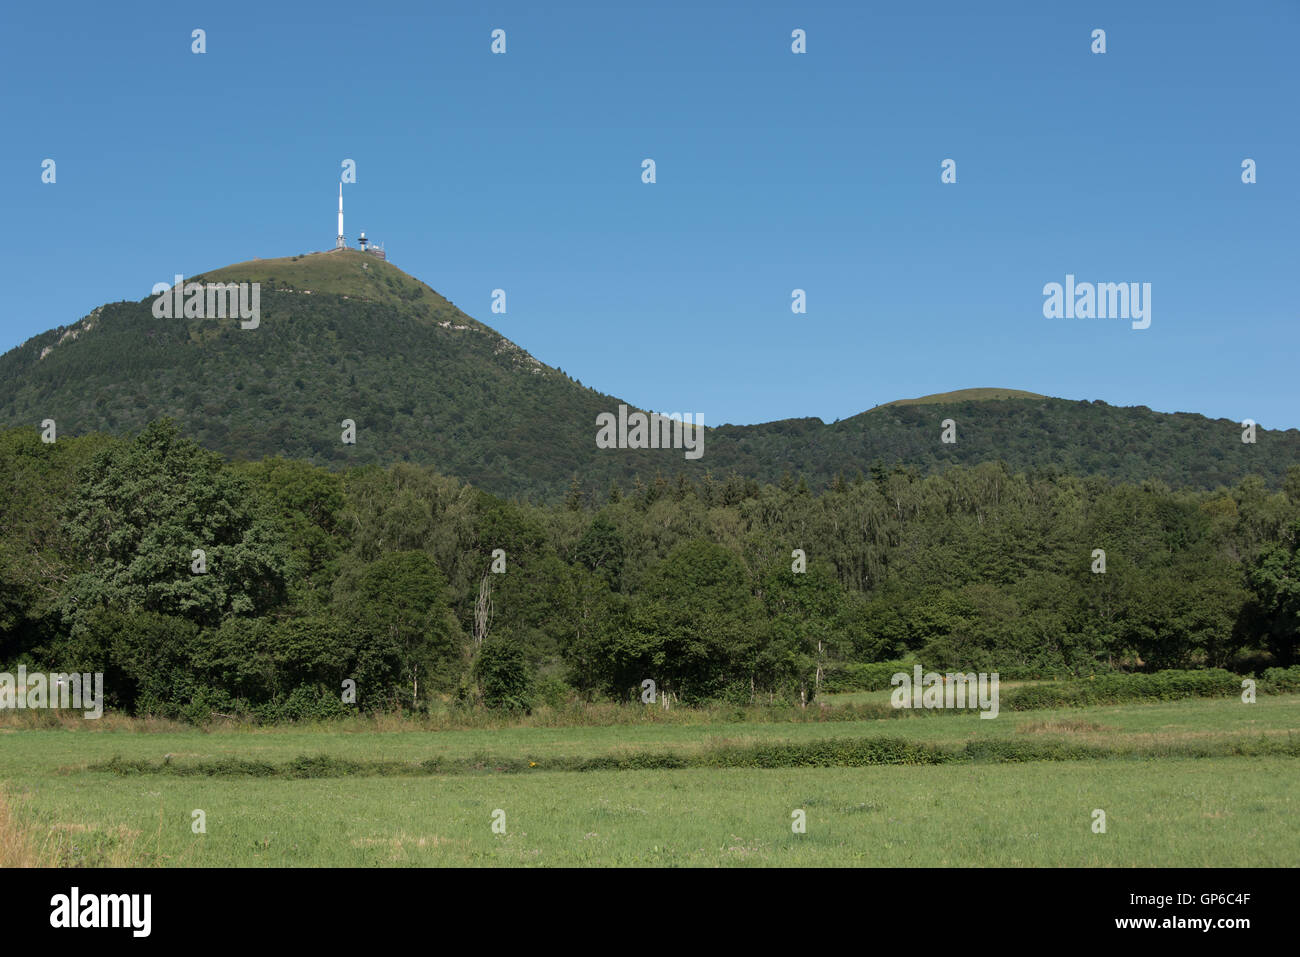 Puy de Dome volcano in the Auvergne region of France Stock Photo